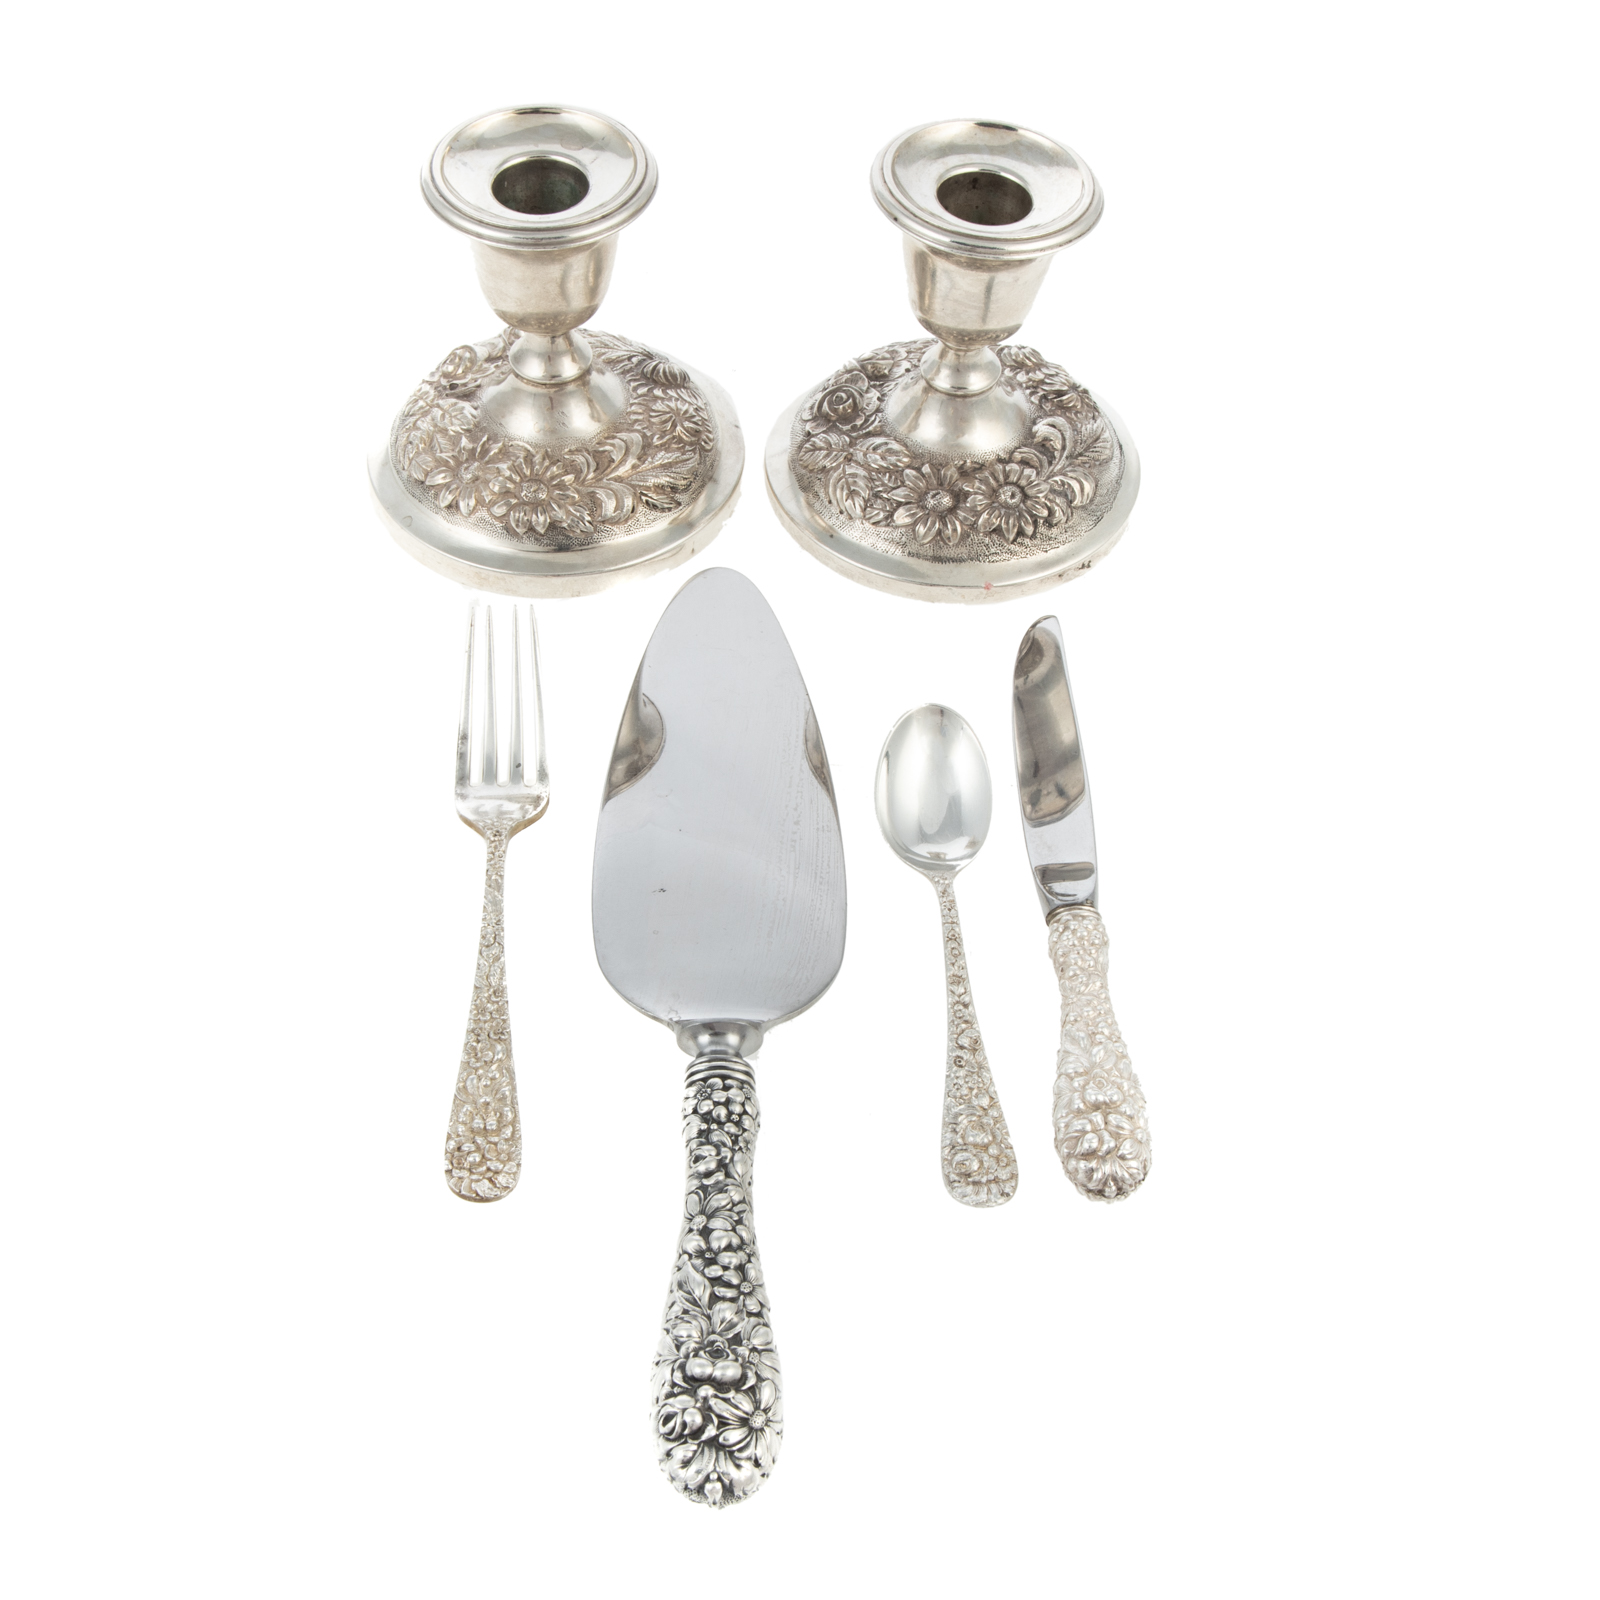 COLLECTION OF STIEFF STERLING SILVER 33872c